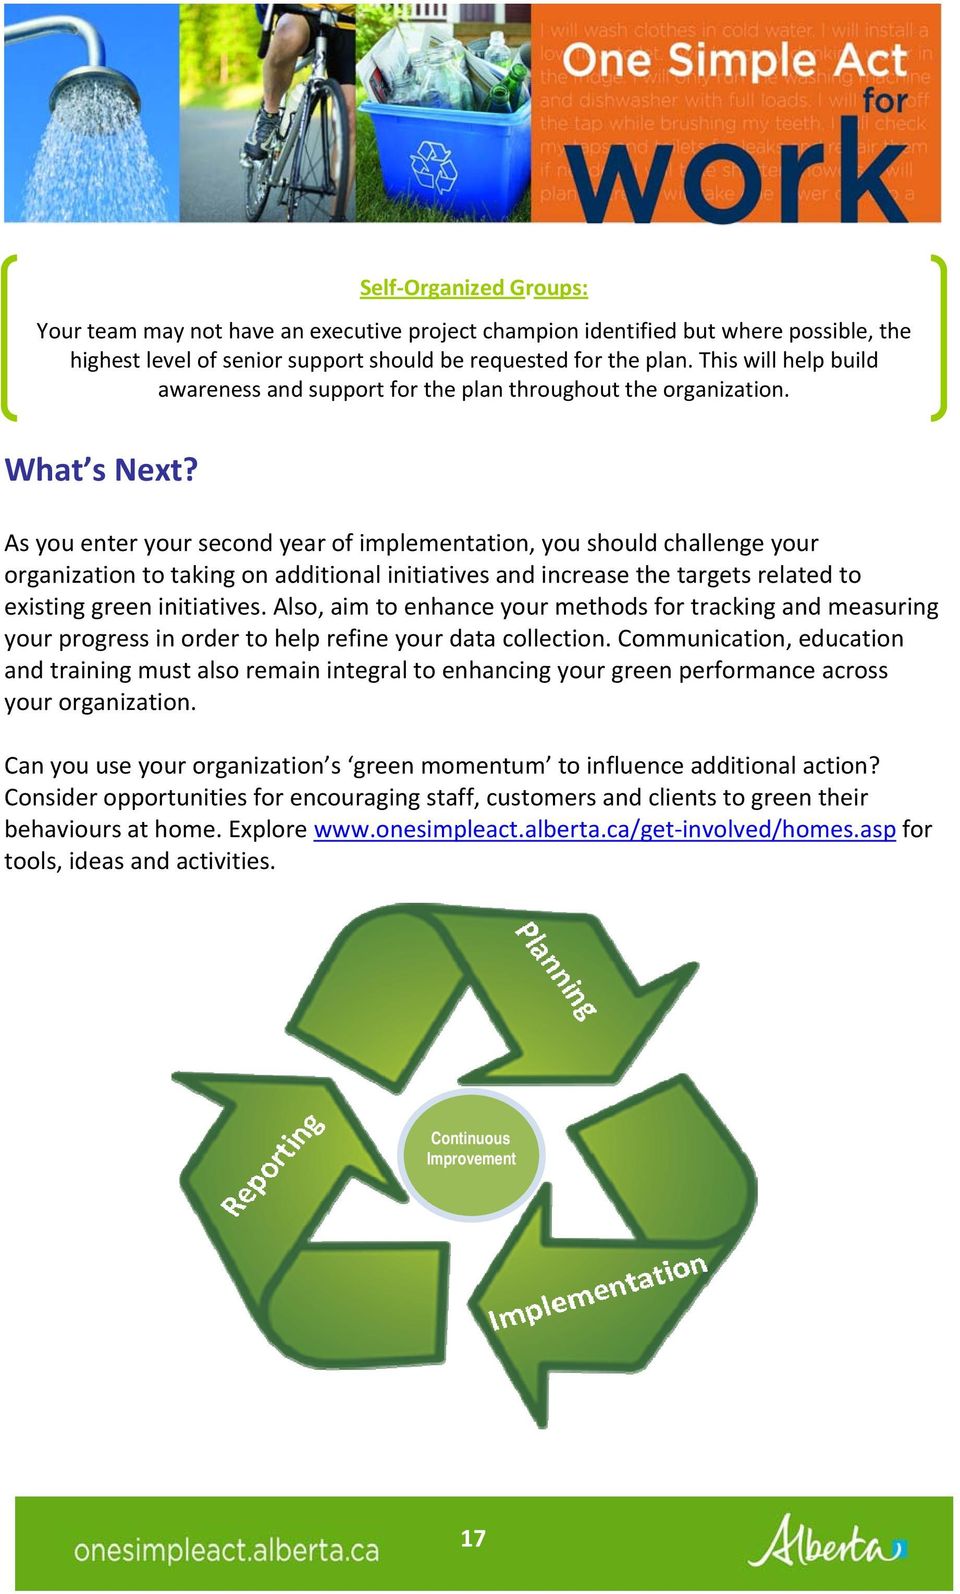 As you enter your second year of implementation, you should challenge your organization to taking on additional initiatives and increase the targets related to existing green initiatives.